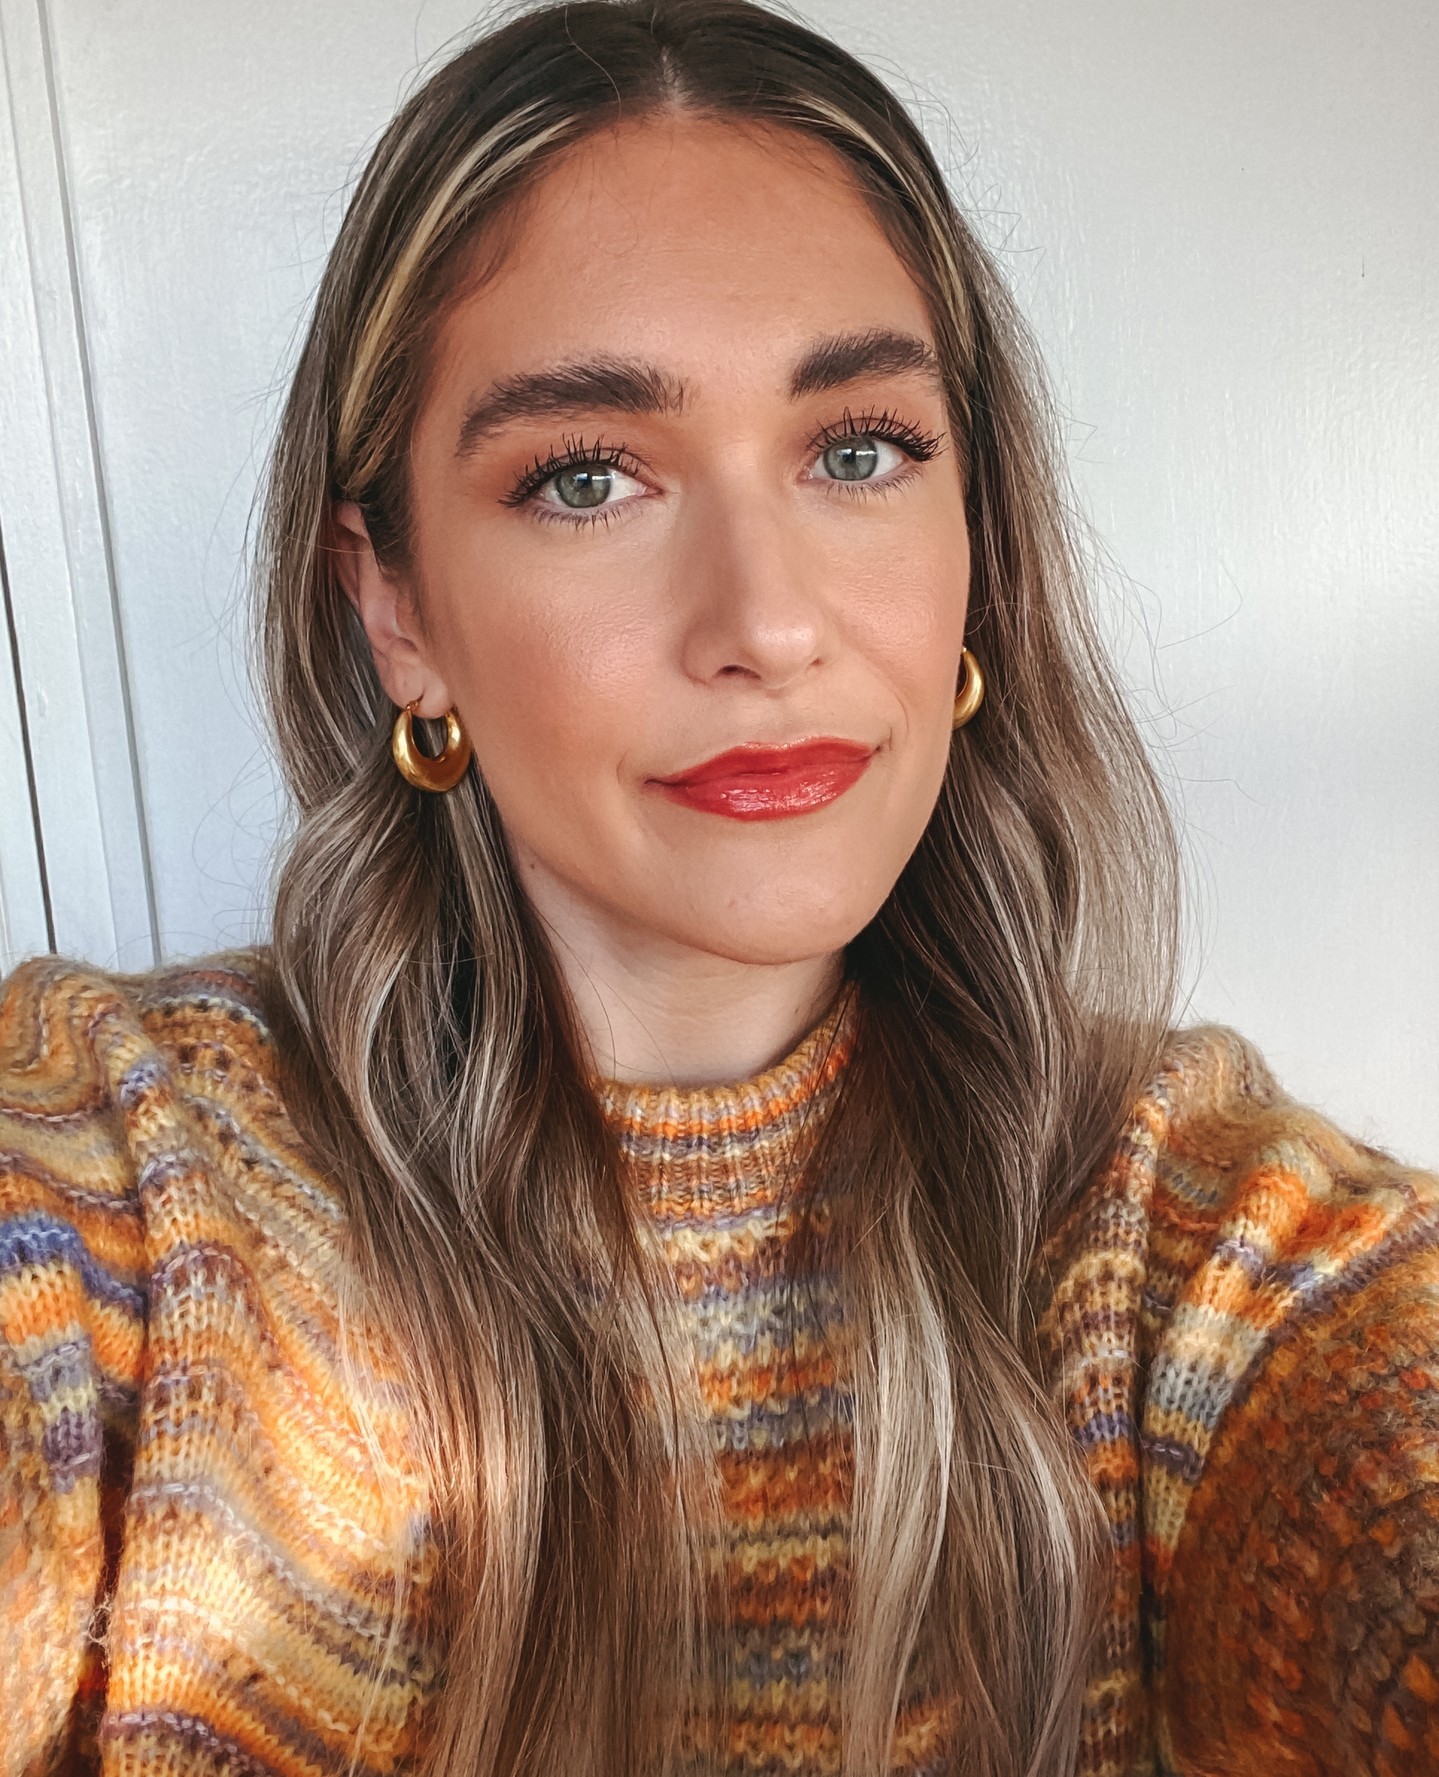 Been looking for one of these '70s-inspired sweaters forever and finally found one that's under $40 at Target! Two notable beauty products I've been loving: ⁠
⁠
1. @caliray Volumizing Tubing Mascara - This mascara adds so much length and makes my lashes look fluffy. Because it's tubing it doesn't flake off and barely smudges at all, love it so far! ⁠
⁠
2. @refybeauty Brow Gel - if you want big, fluffy brows that hold up all day, this product is for you. It's actually a softer hold than I expected (as it doesn't feel crunchy or hard in the brows) but still holds my brows in place the entire day.